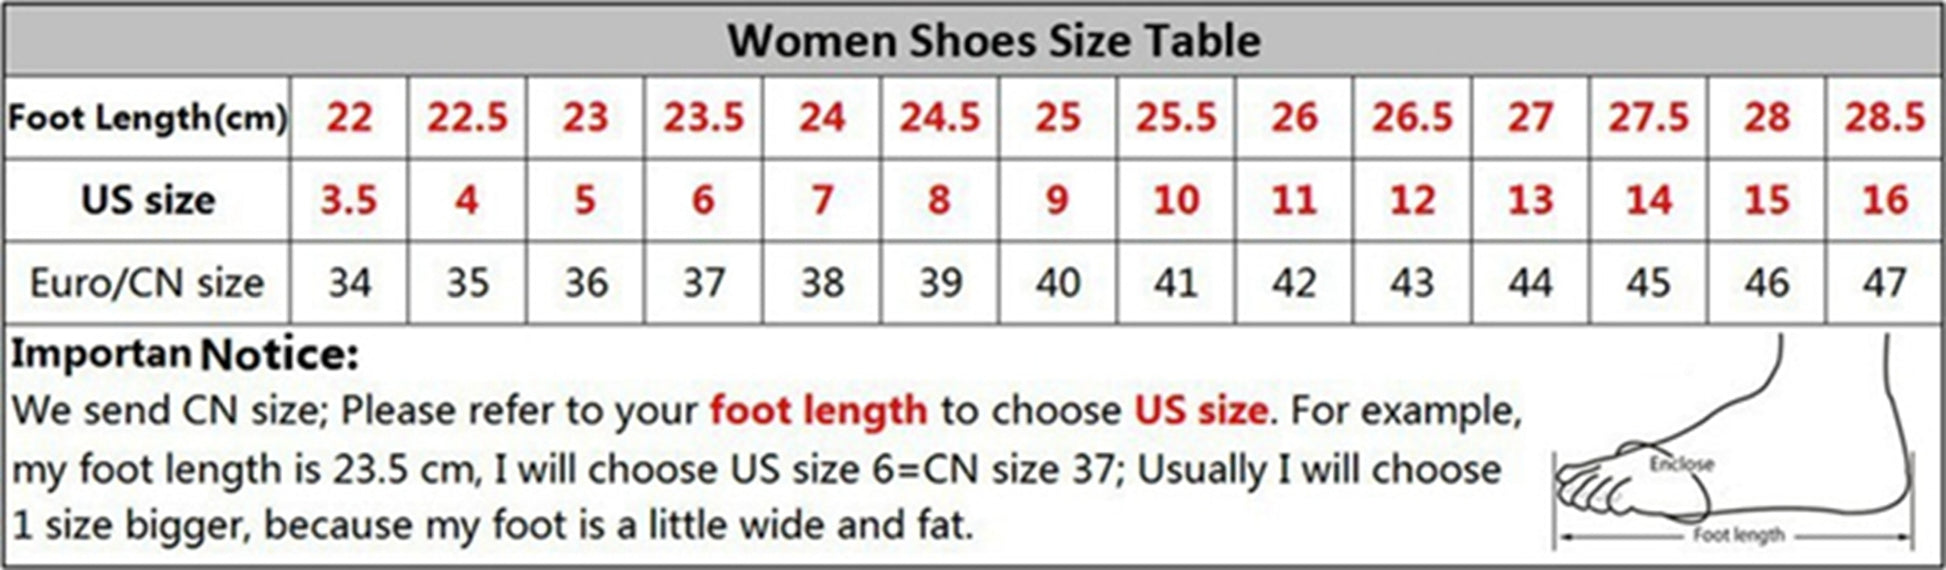 Women's Shoes Genuine Leather Flats Shoes For Woman Slip On Casual Shoes Top Quality Ins Fashion Shoes 34-41 - LiveTrendsX